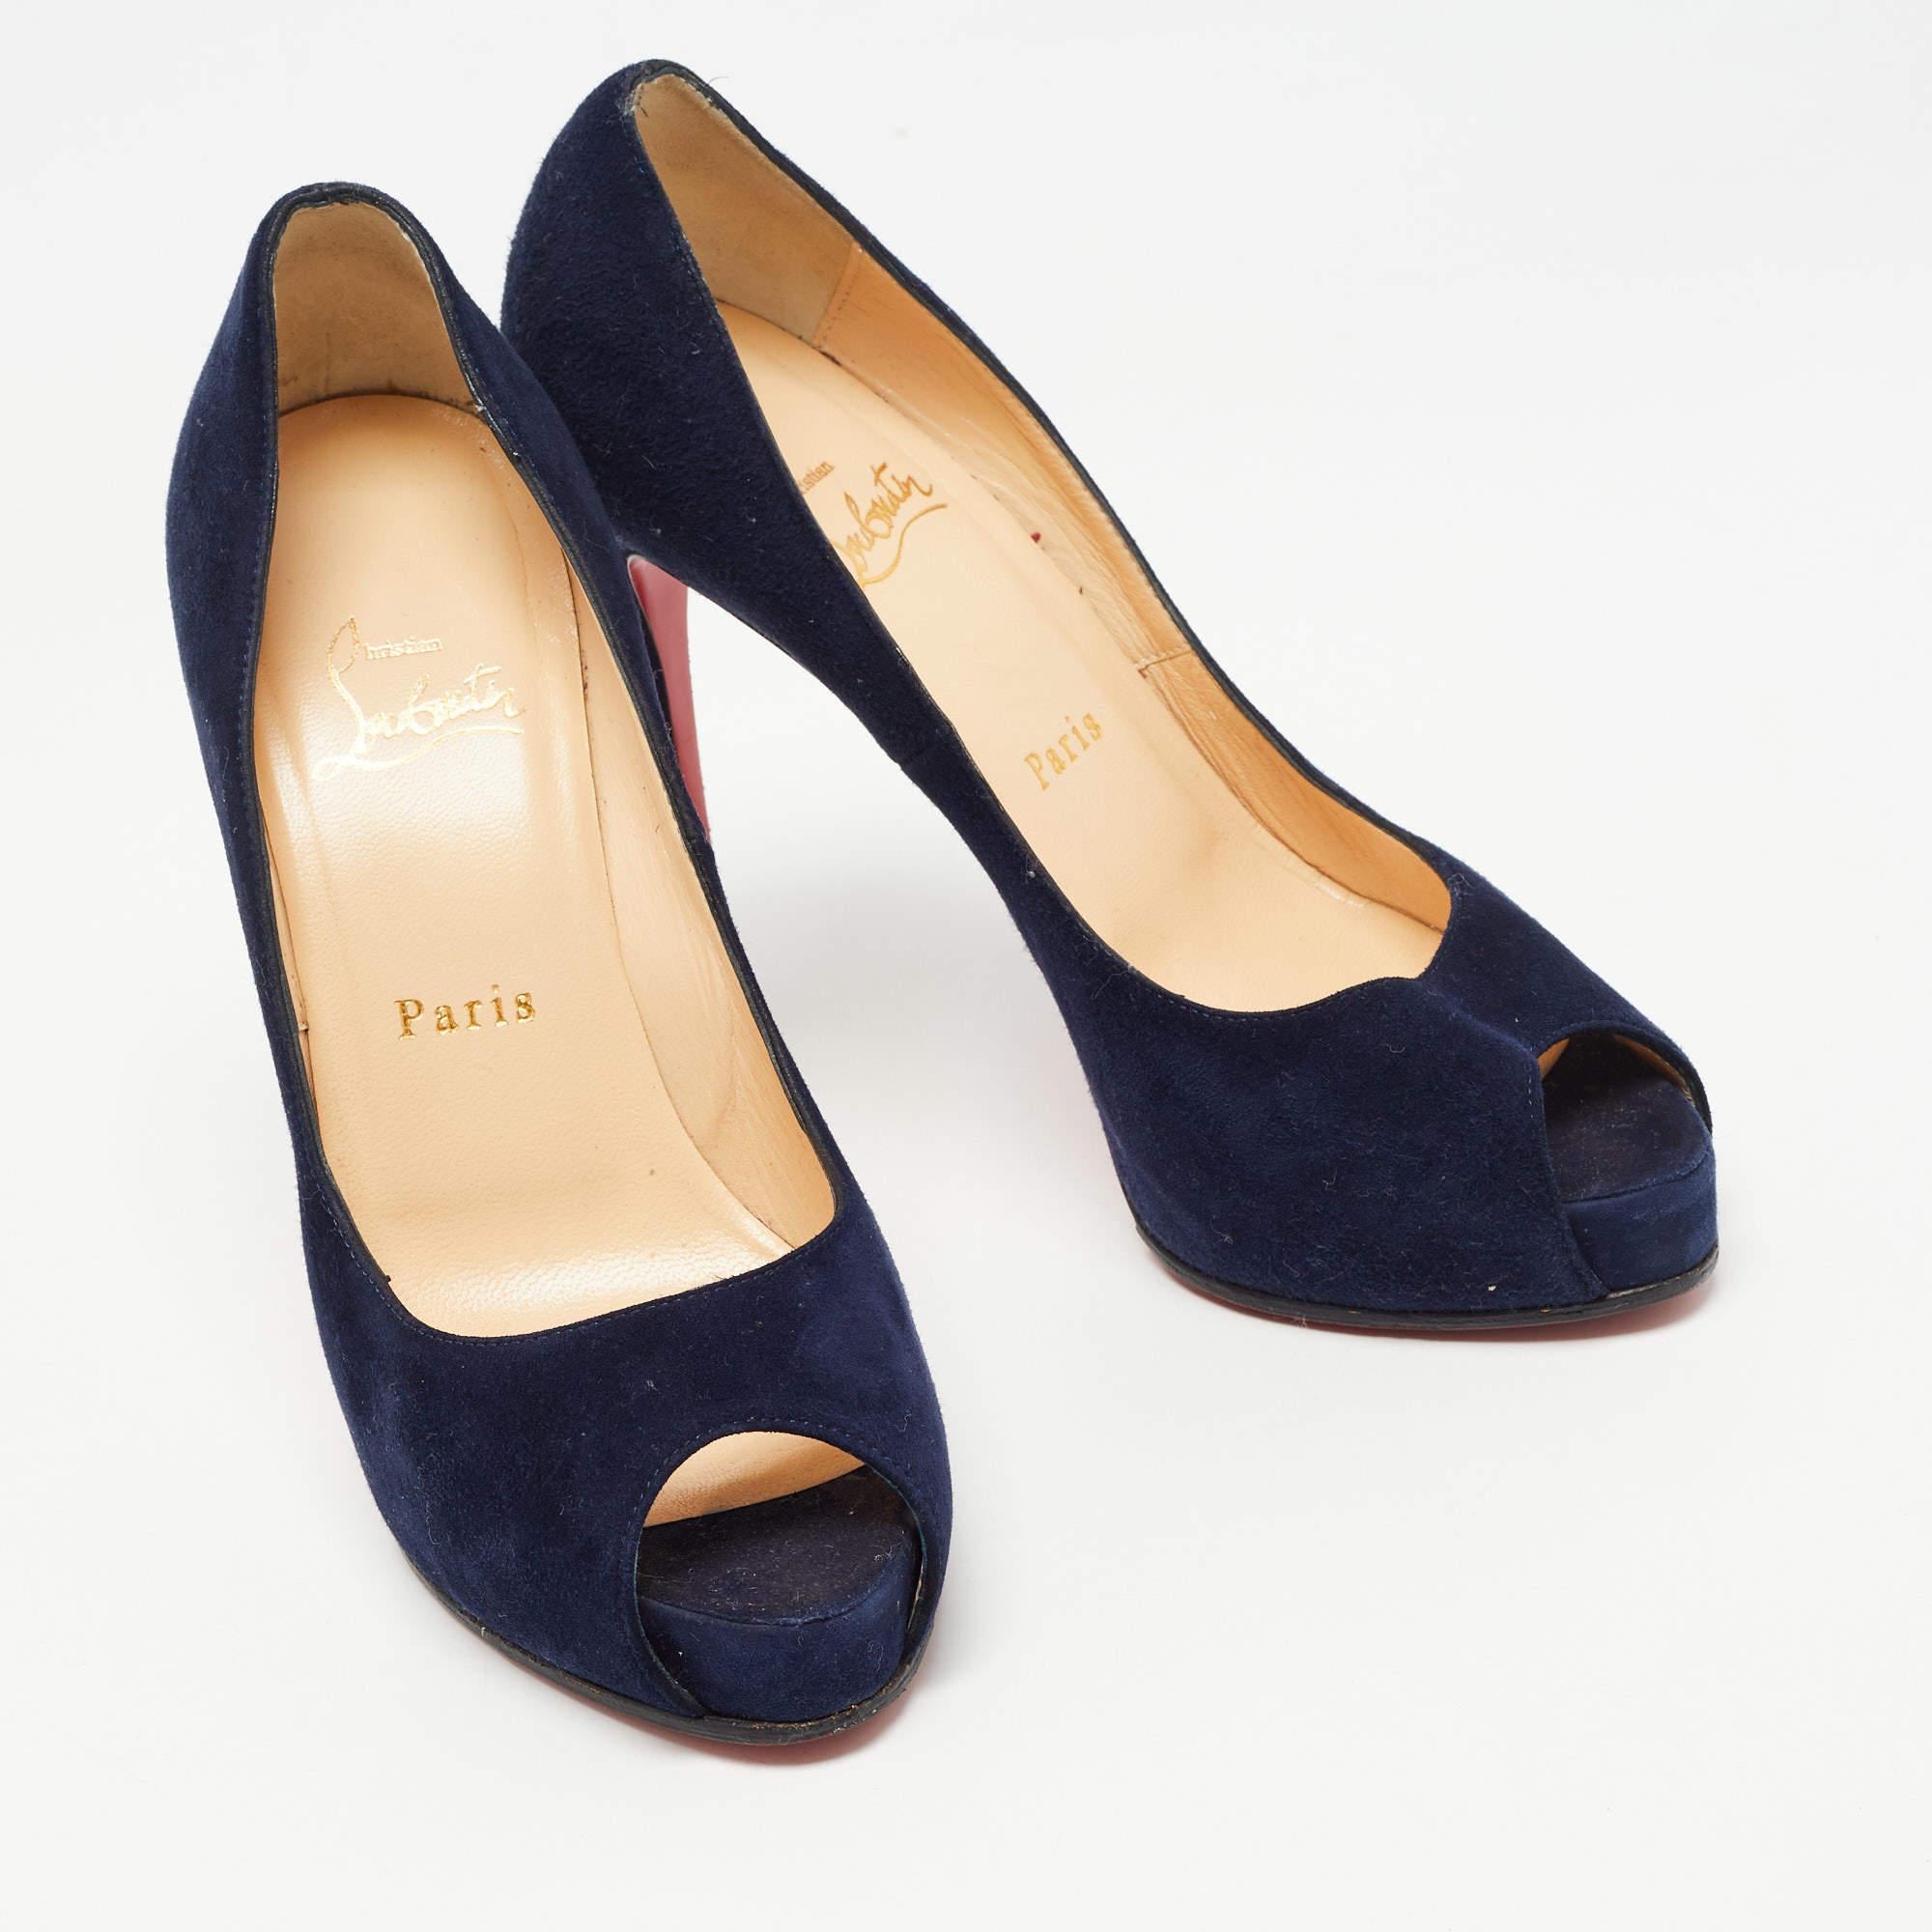 Black Christian Louboutin Navy Blue Suede Very Prive Pumps Size 37.5